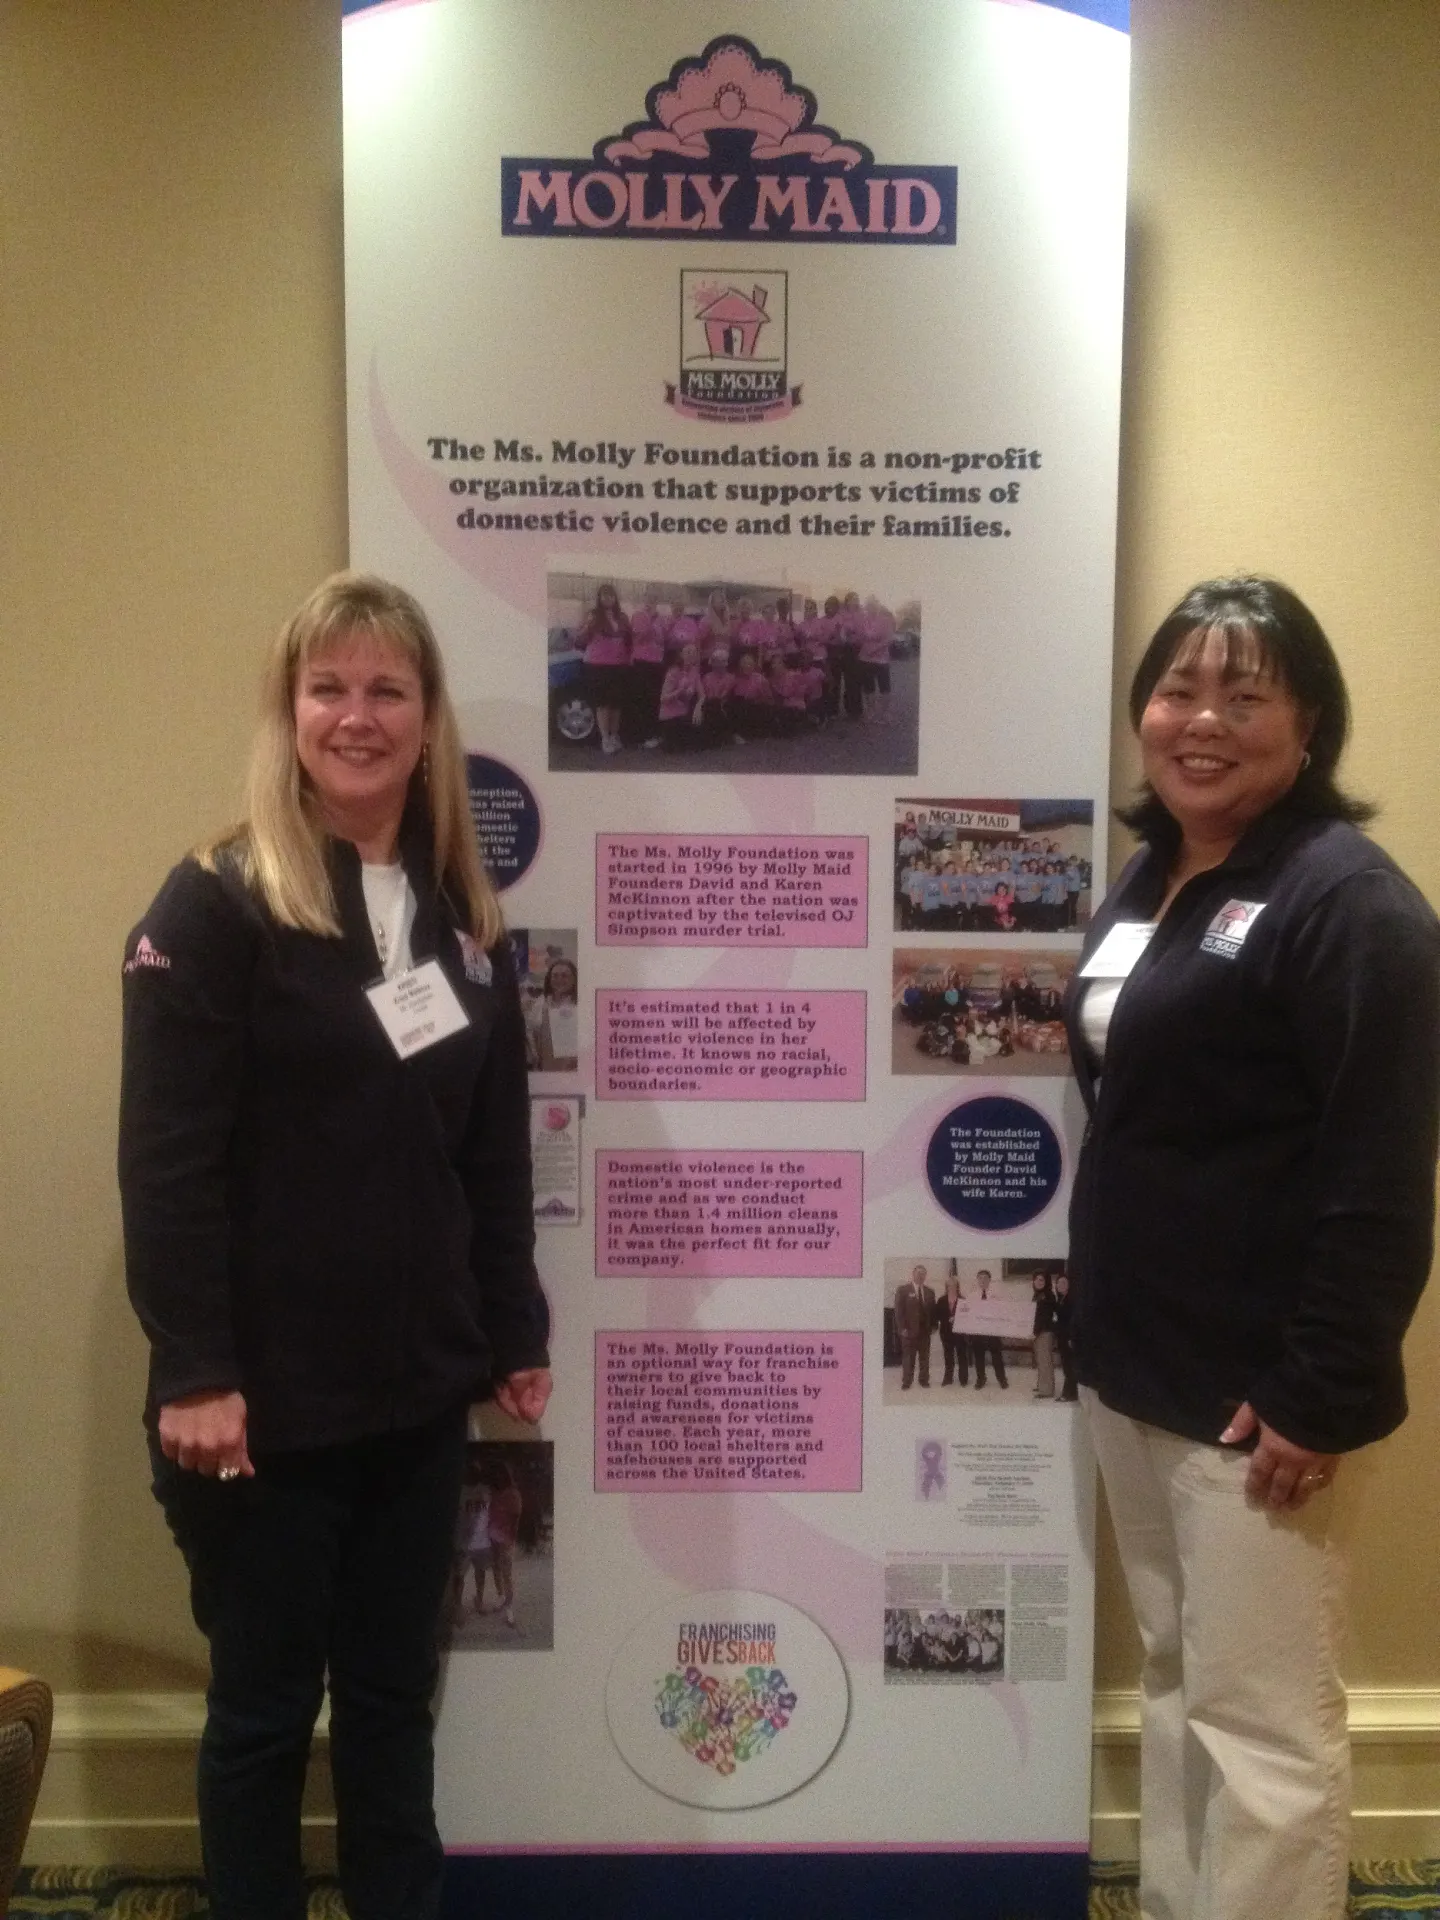 Kristi Mailloux and Danessa Itaya represented the Ms. Molly Foundation at the 2012 IFA Franchising Gives Back event.